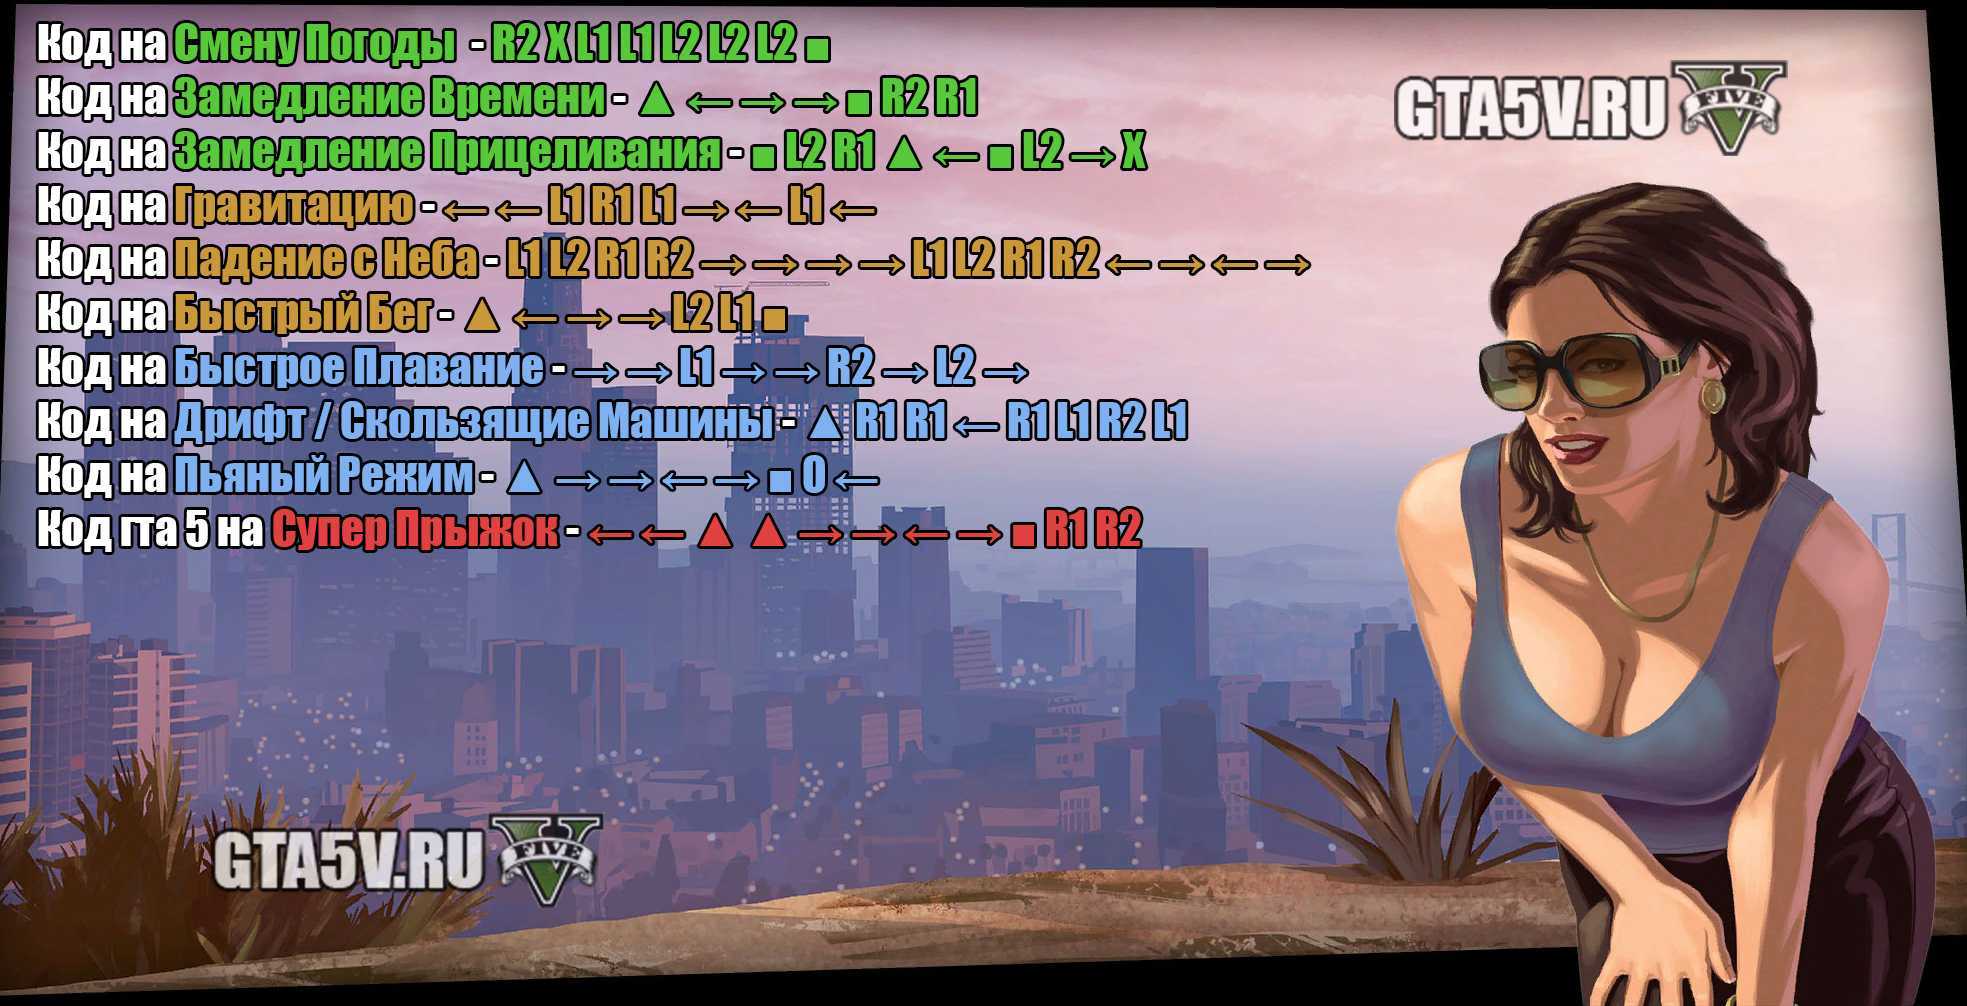 Cheats codes for gta 5 for money фото 80